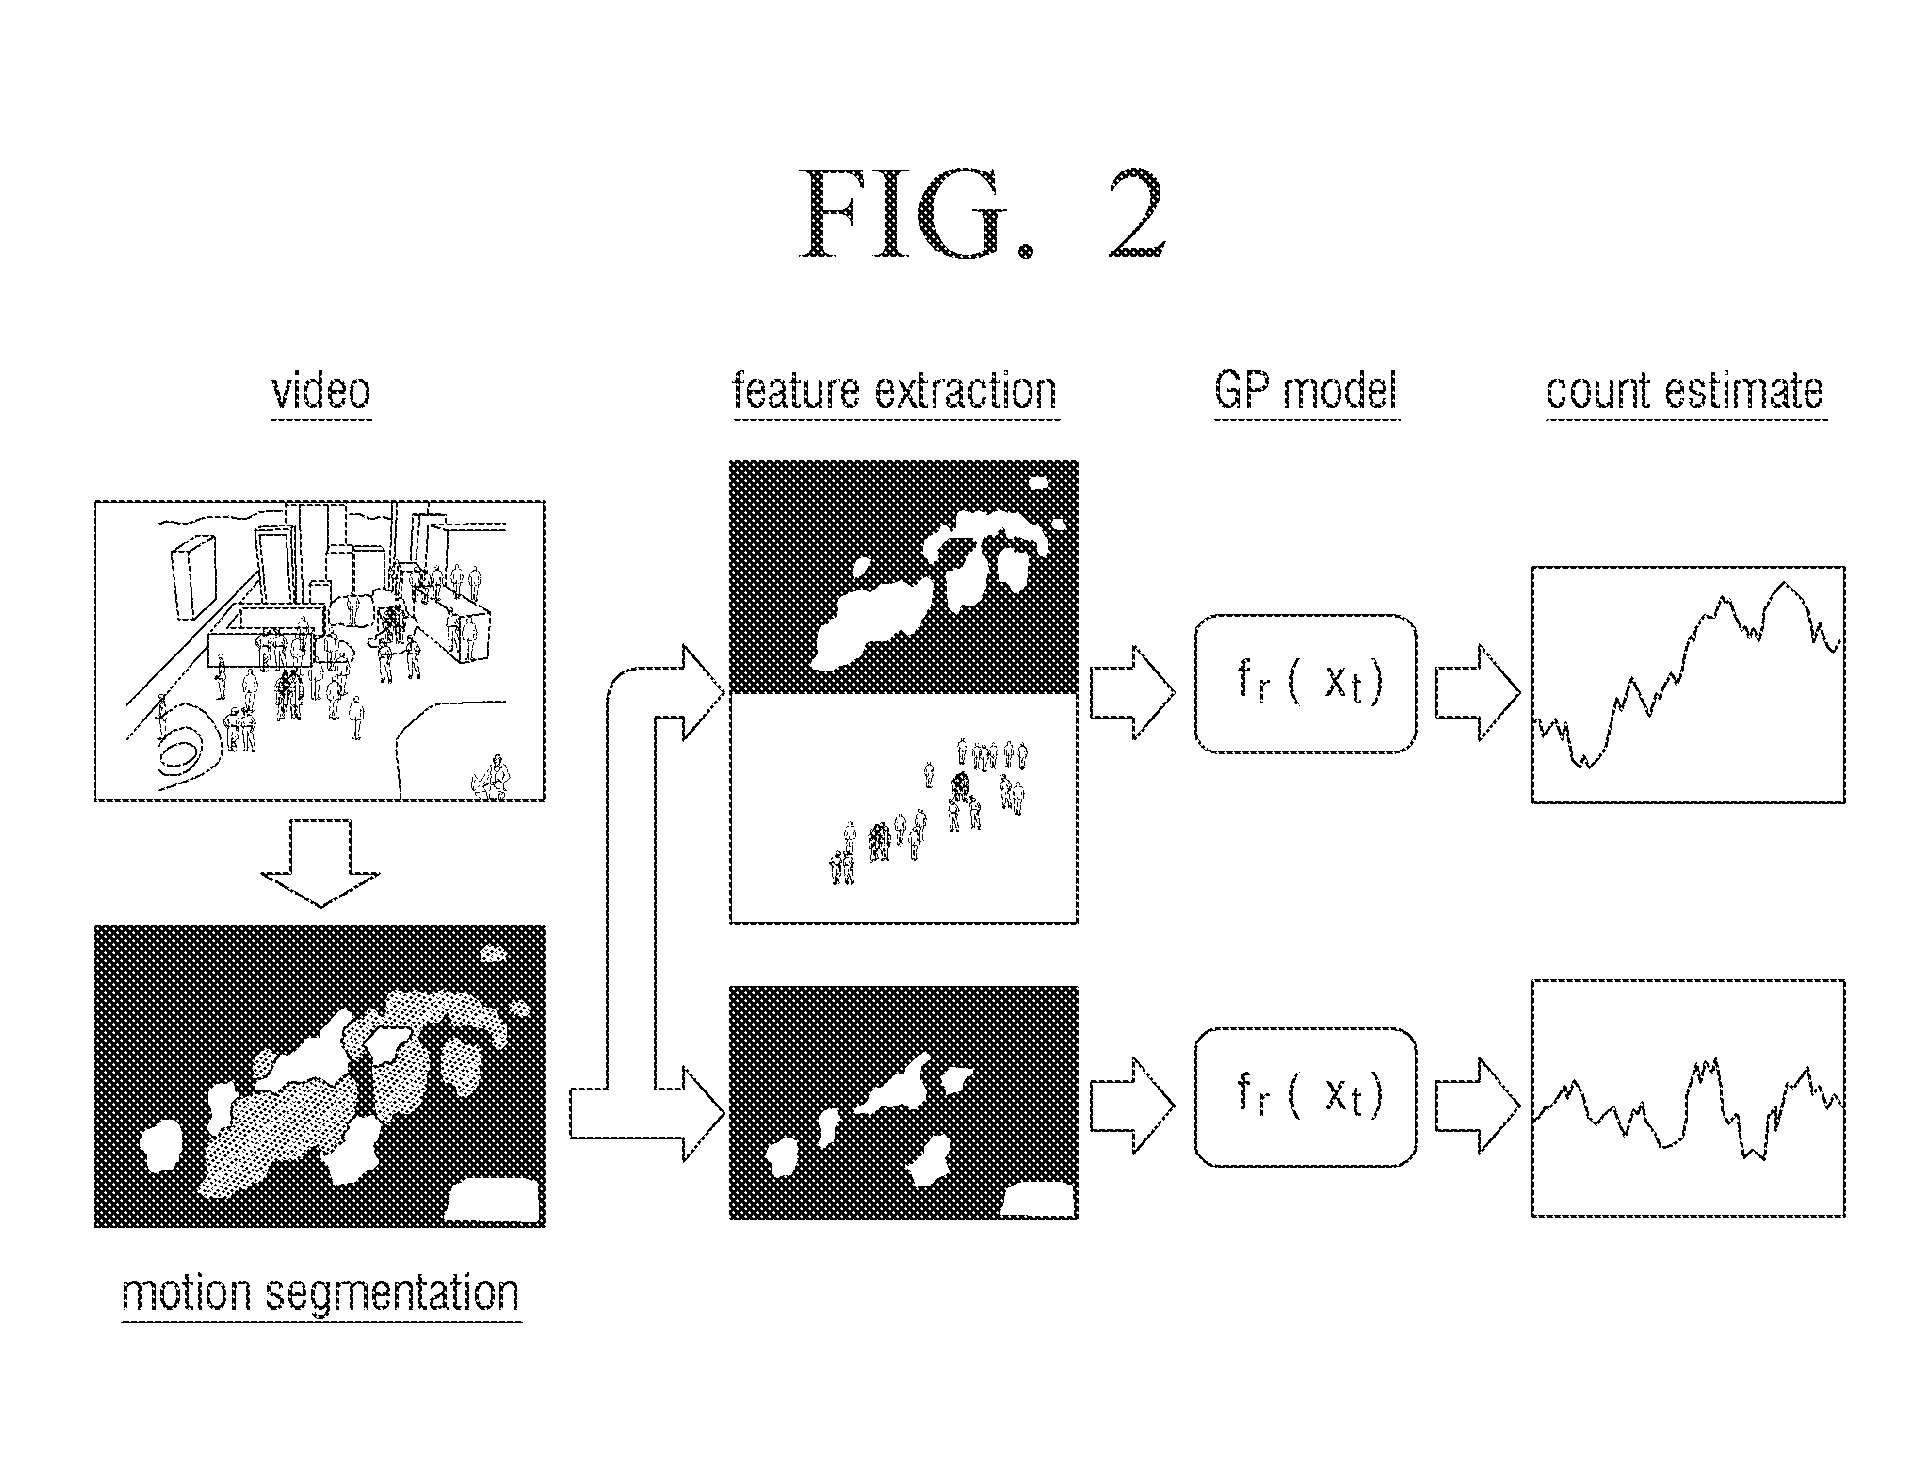 Method and apparatus for counting person